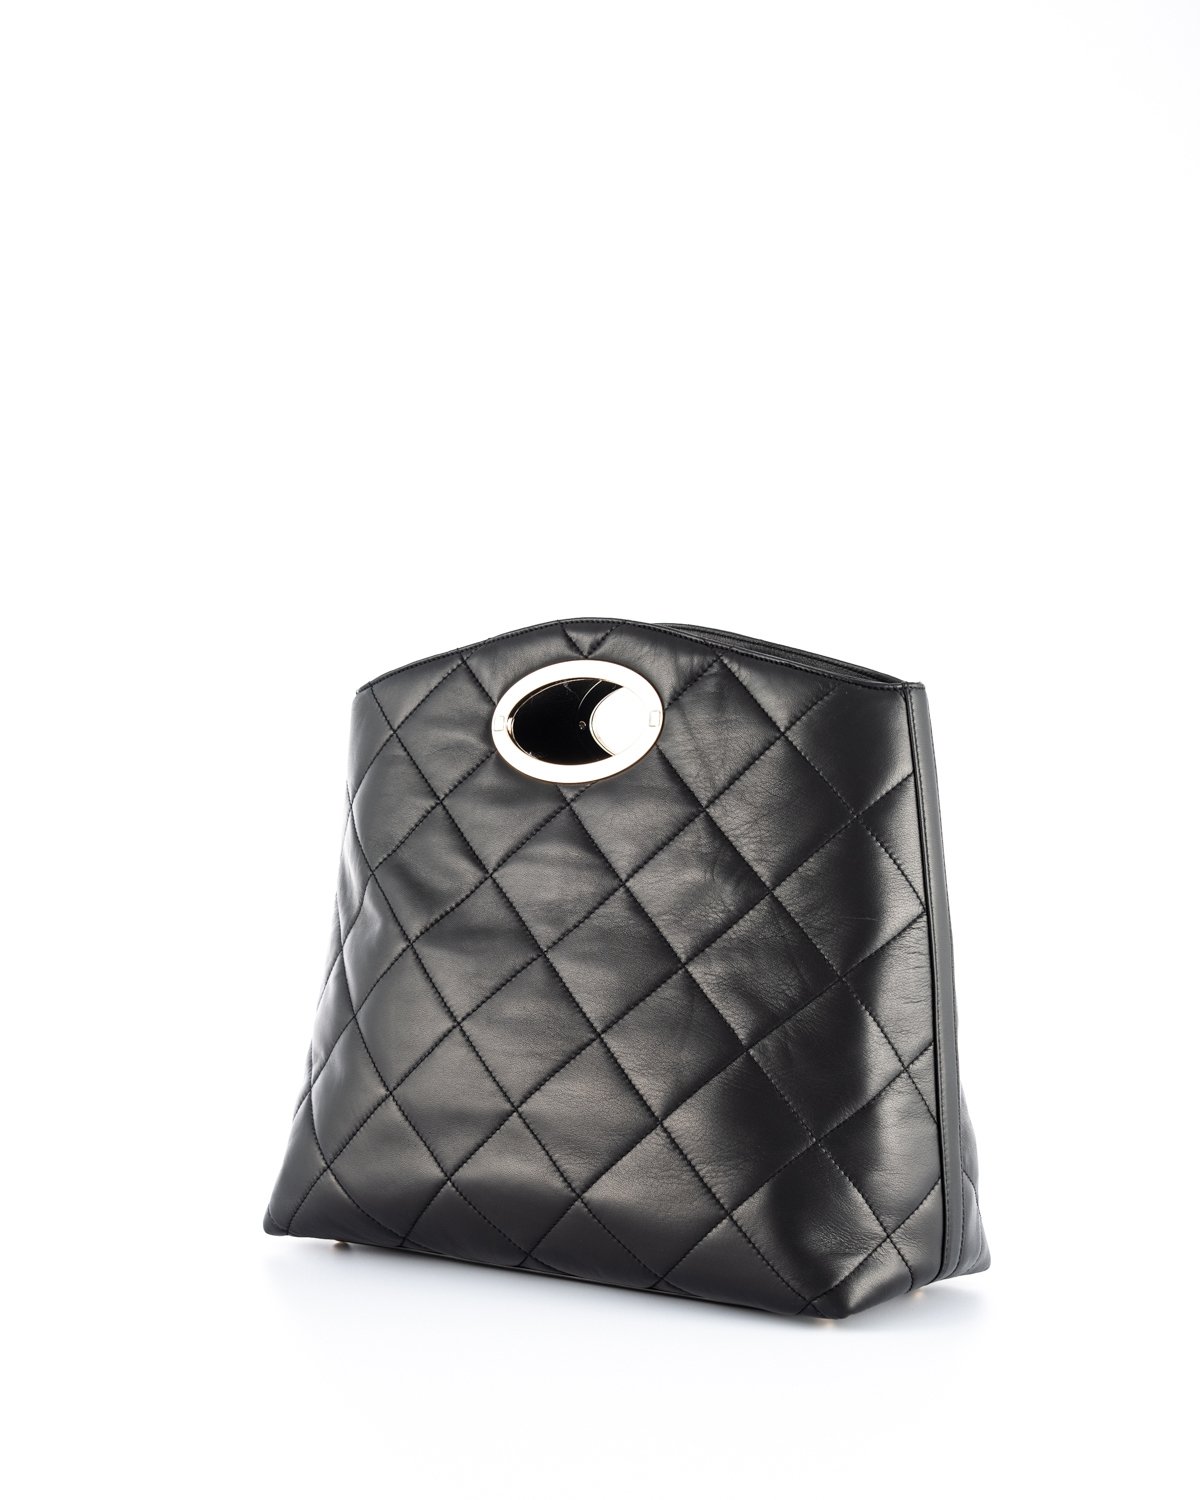 Sara black leather quilted bag | Accessories | Genny